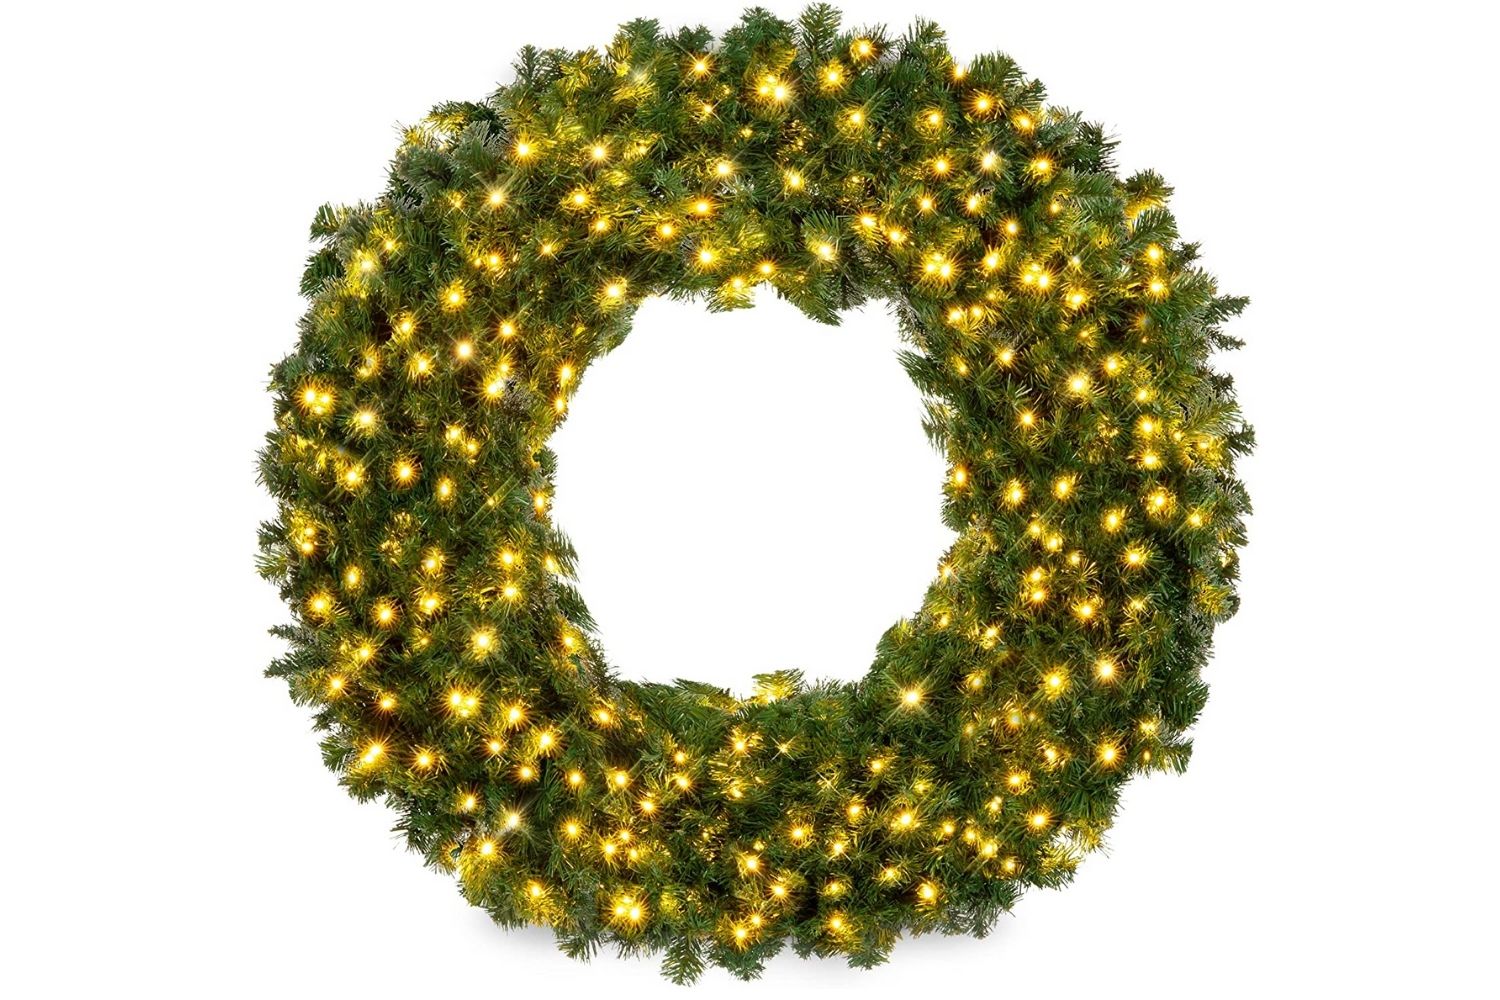 The Best Christmas Wreaths Option: Best Choice Products 48in Pre-Lit Christmas Wreath